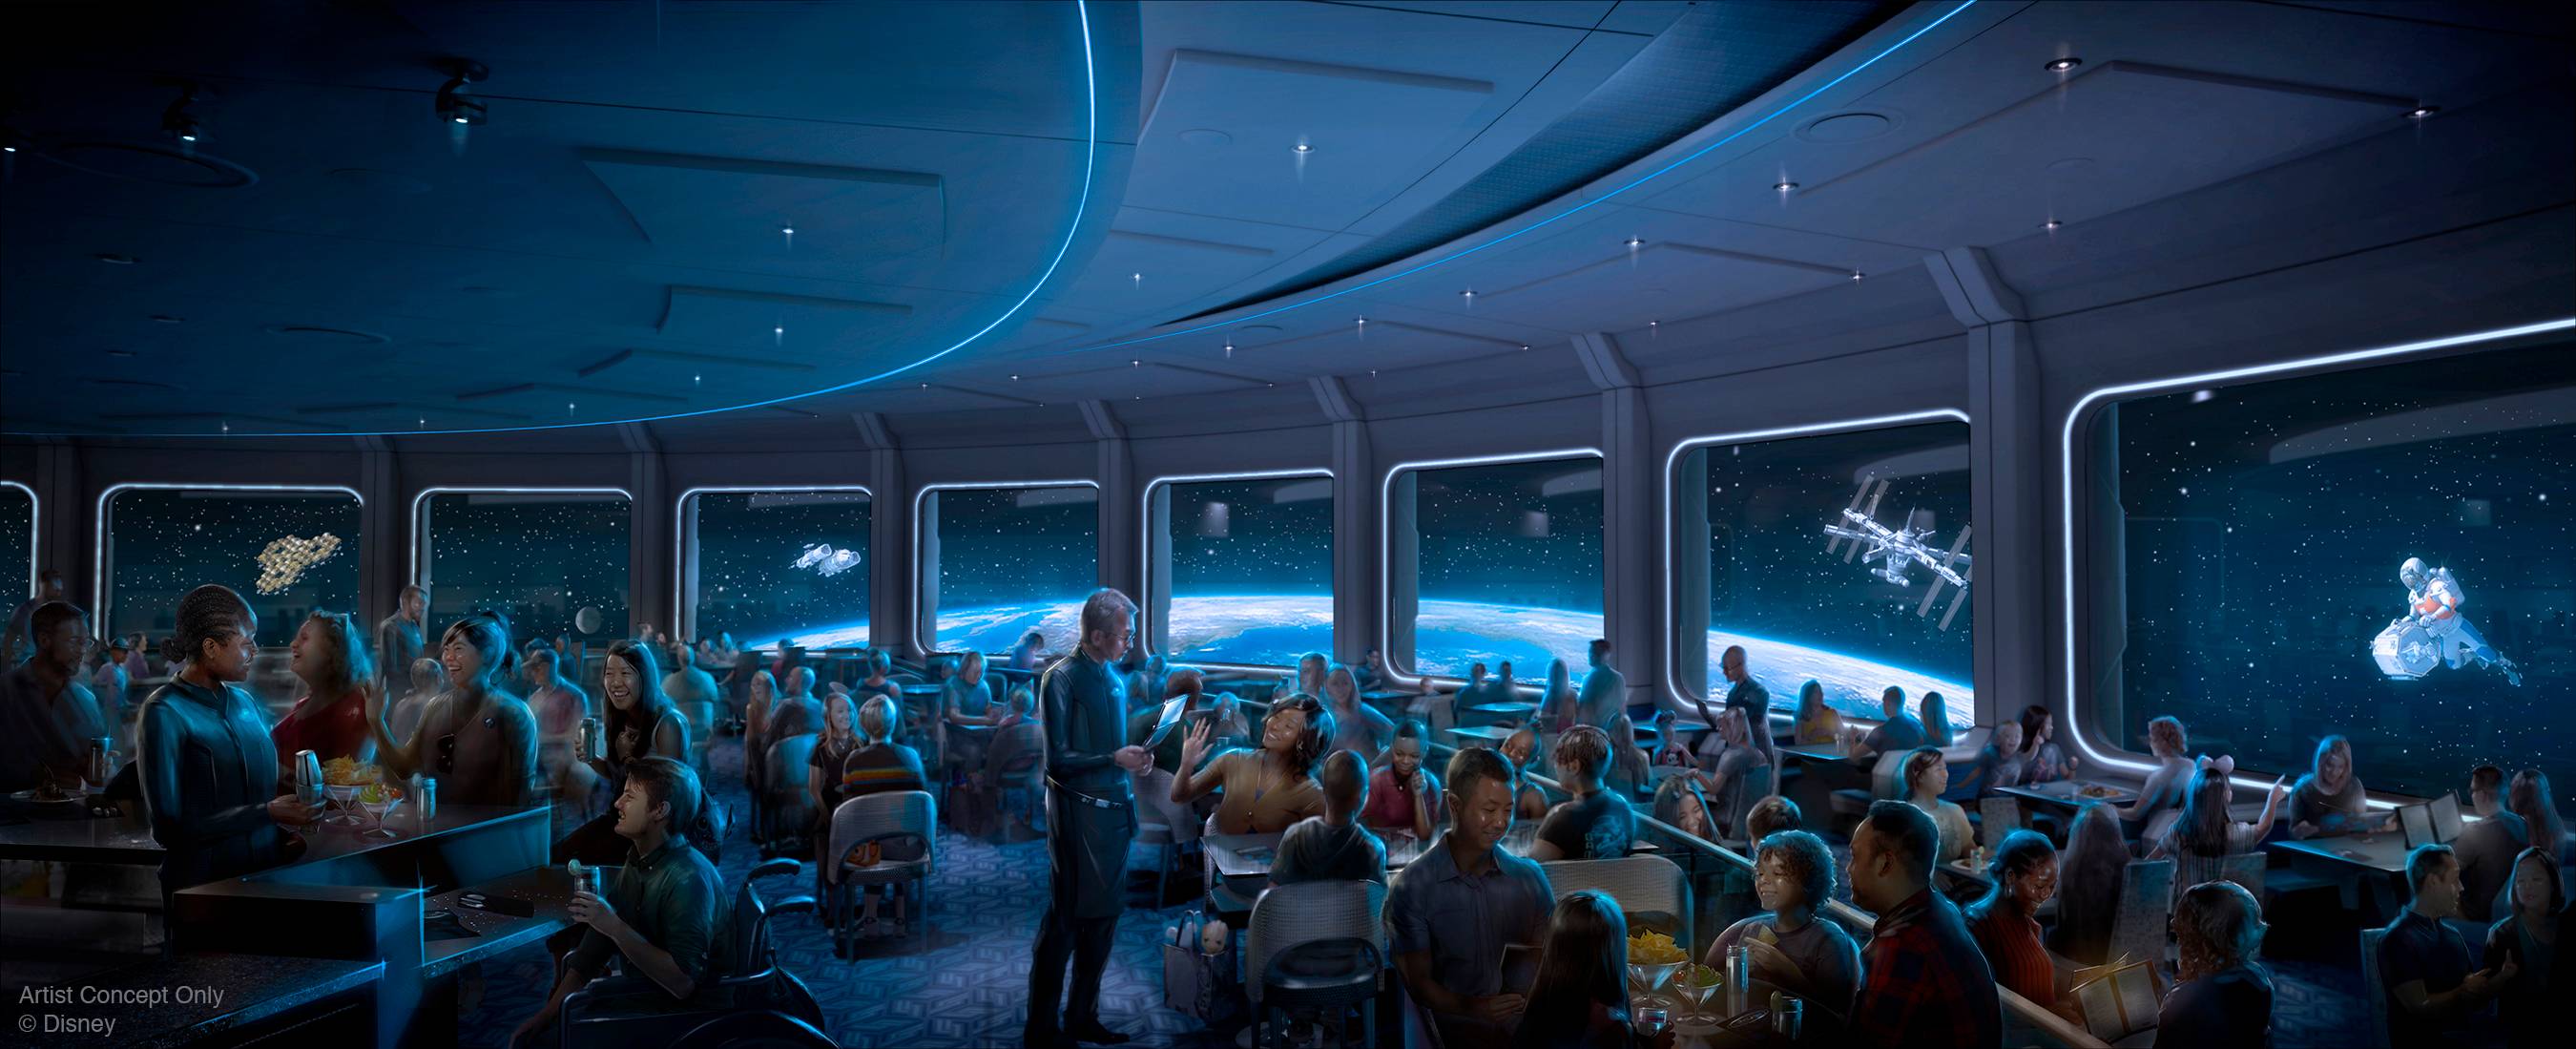 Reservation and menu details for Space 220 coming soon to EPCOT